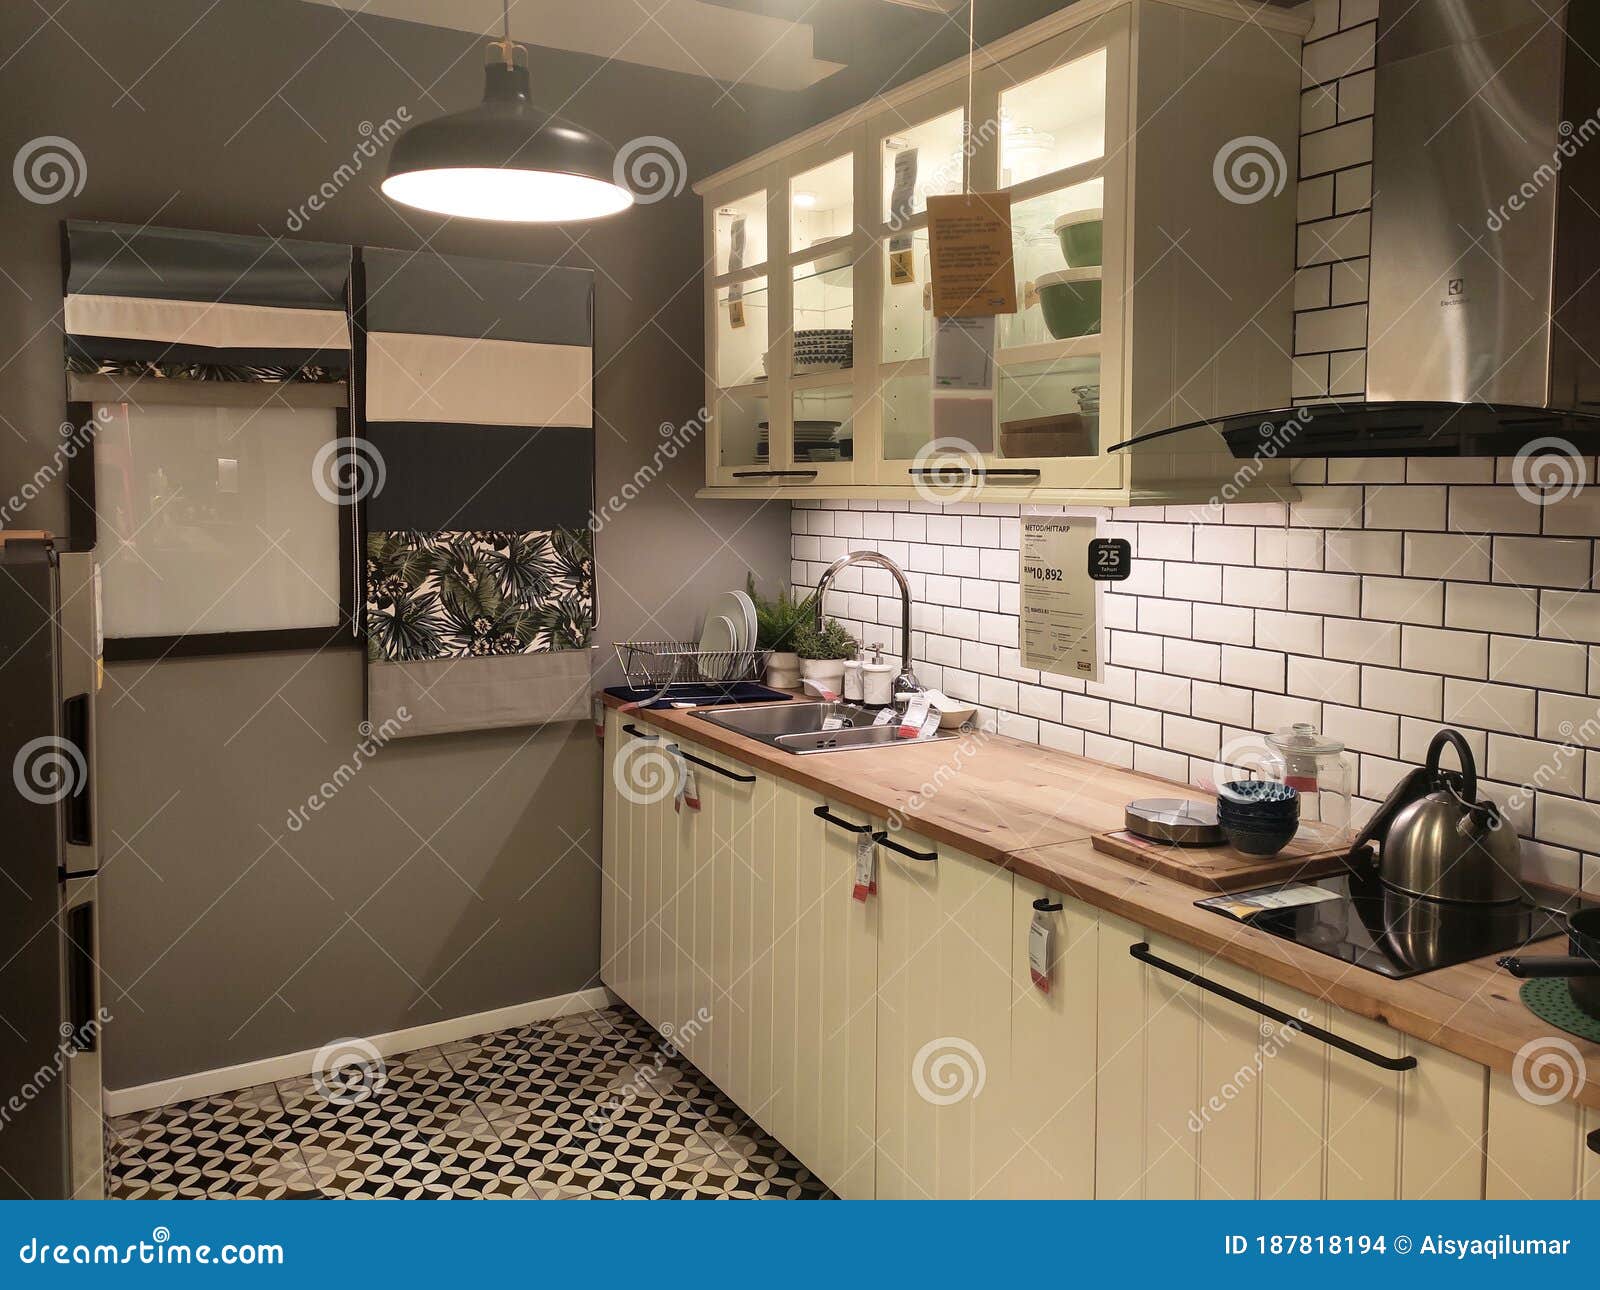 Kitchen Section Inside Ikea Malaysia Showroom Editorial Stock Image Image Of Inexpensive Consumer 187818194